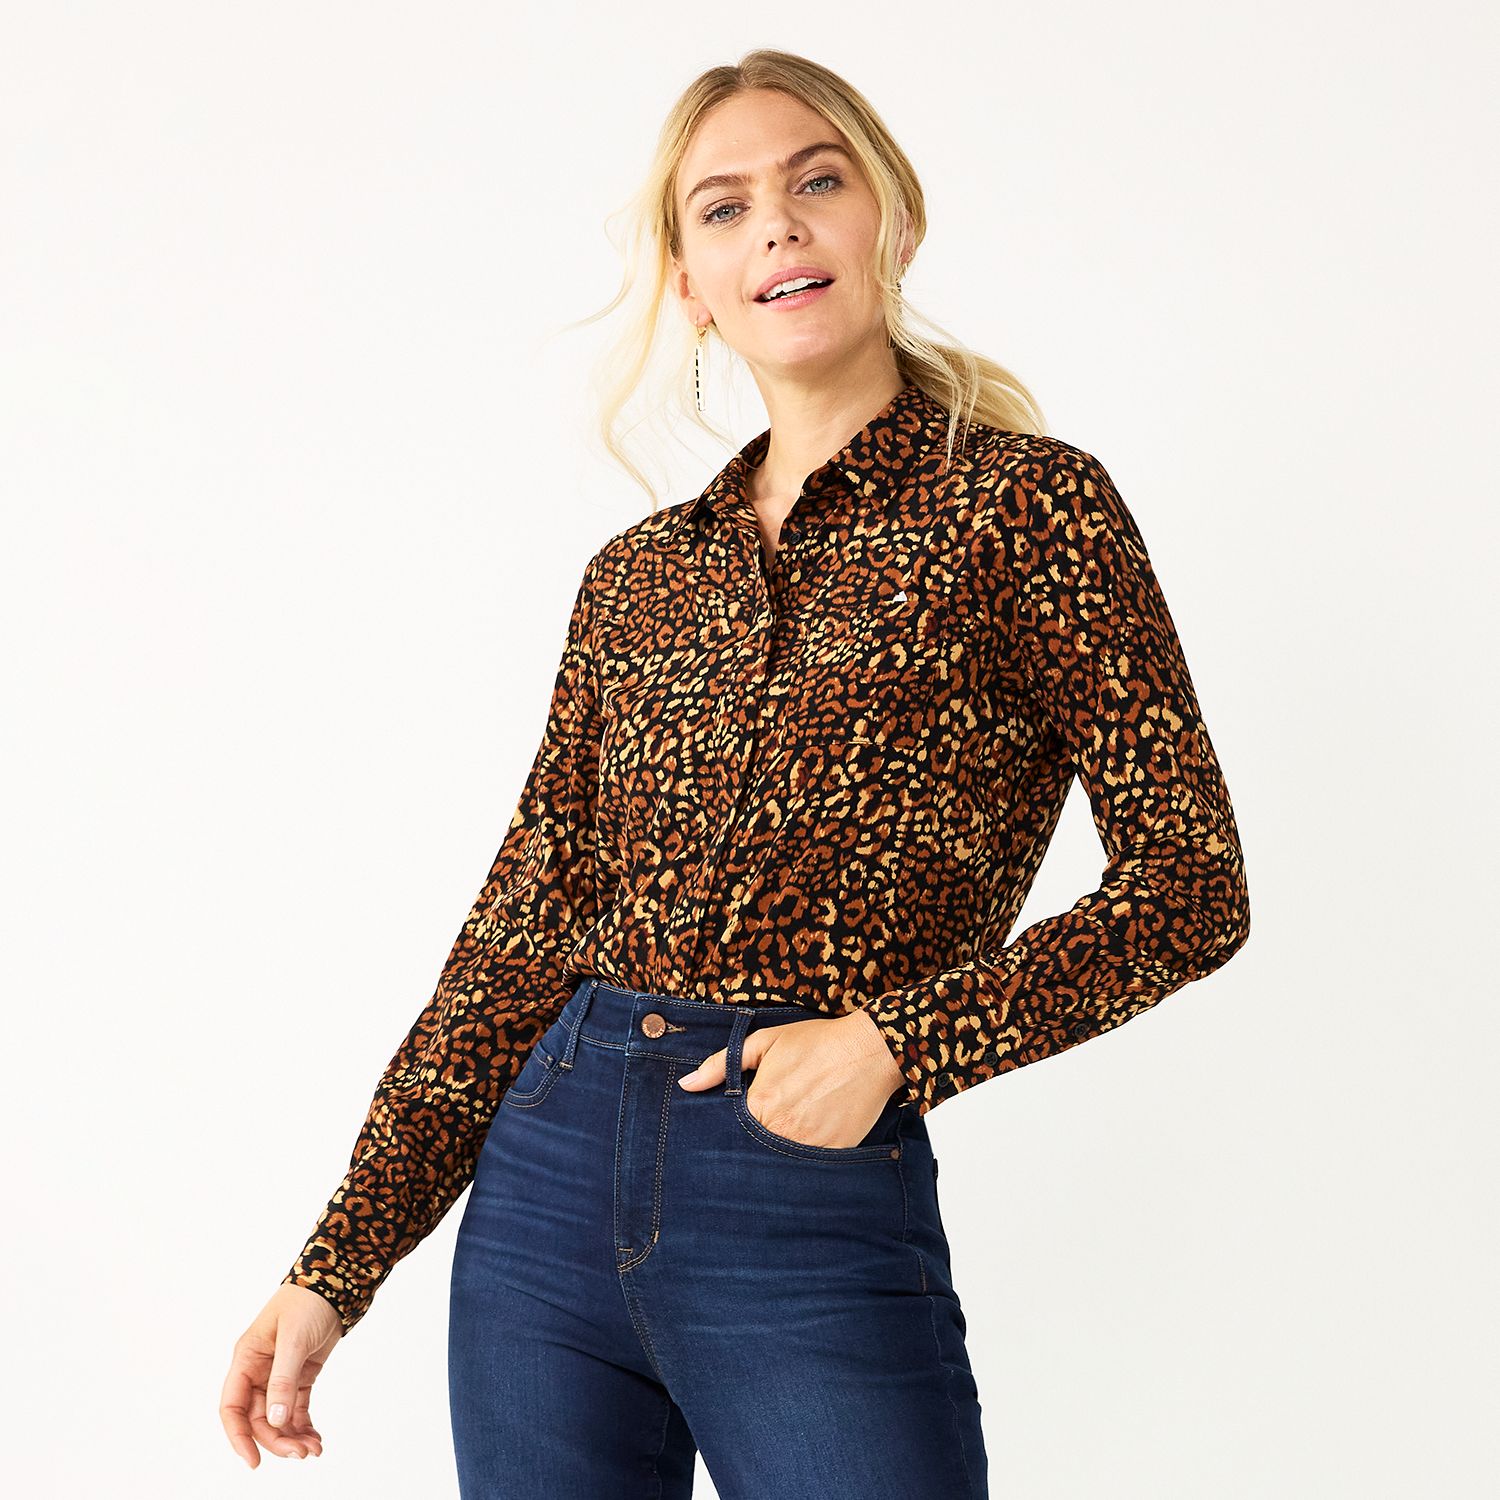 Kohl's Mix and Match Fall Casual Outfits - Everyday Savvy